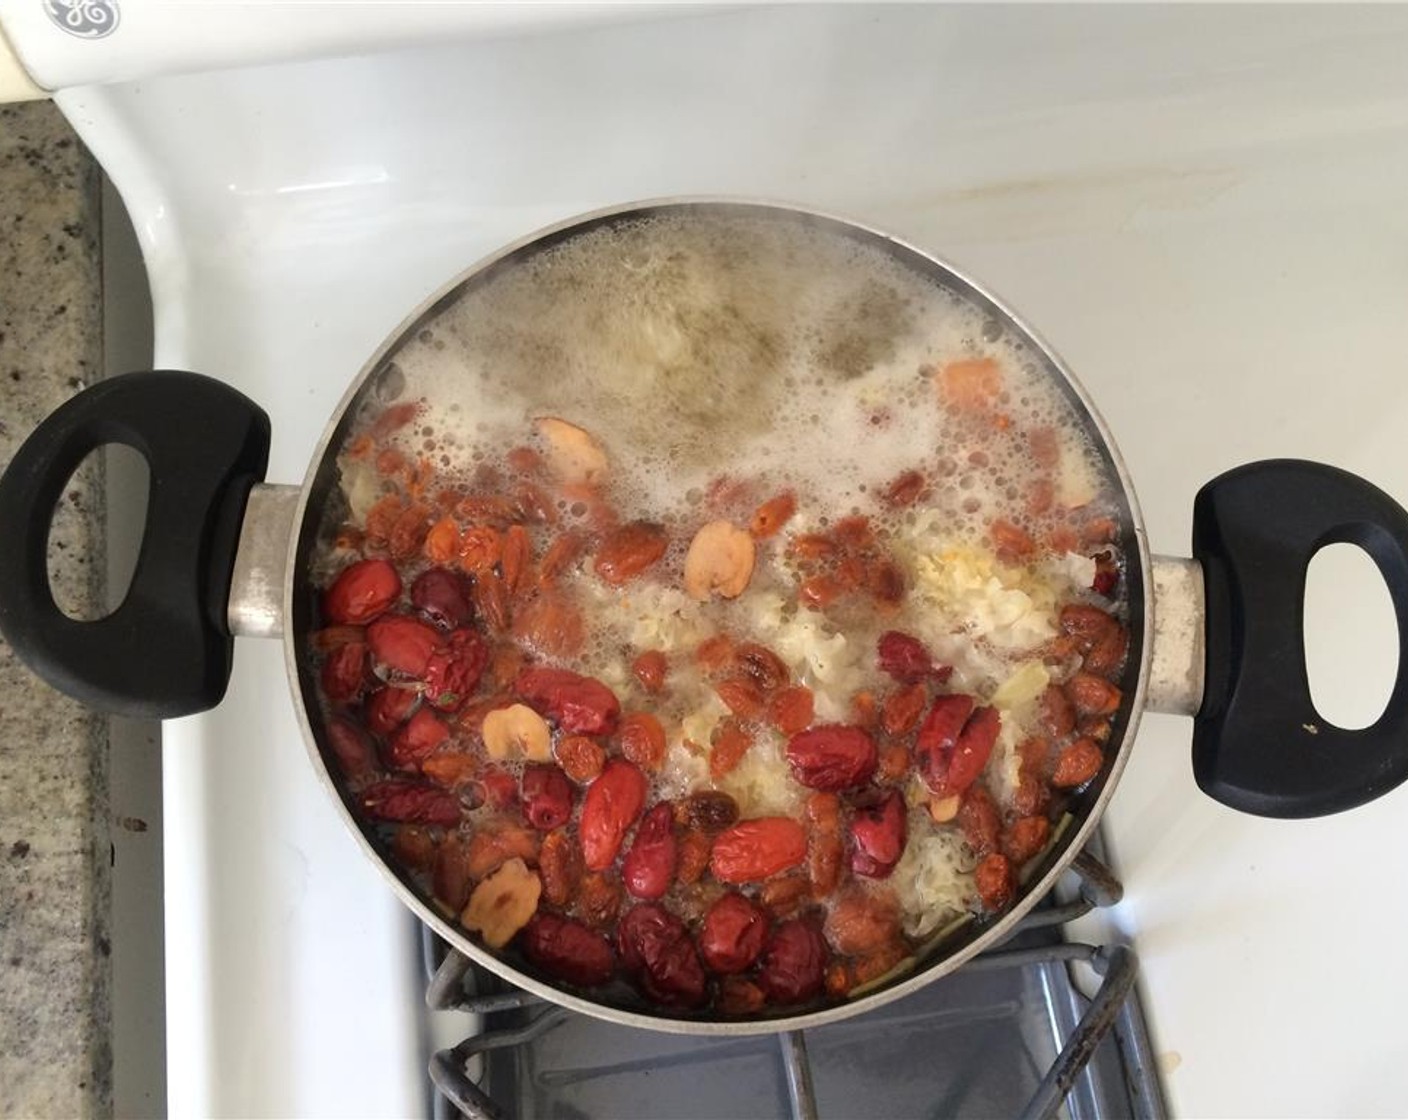 step 4 Rinse Dried Red Dates (20), Goji Berries (10) and Dried Longan (1/3 cup) in warm to hot water for 10 seconds.